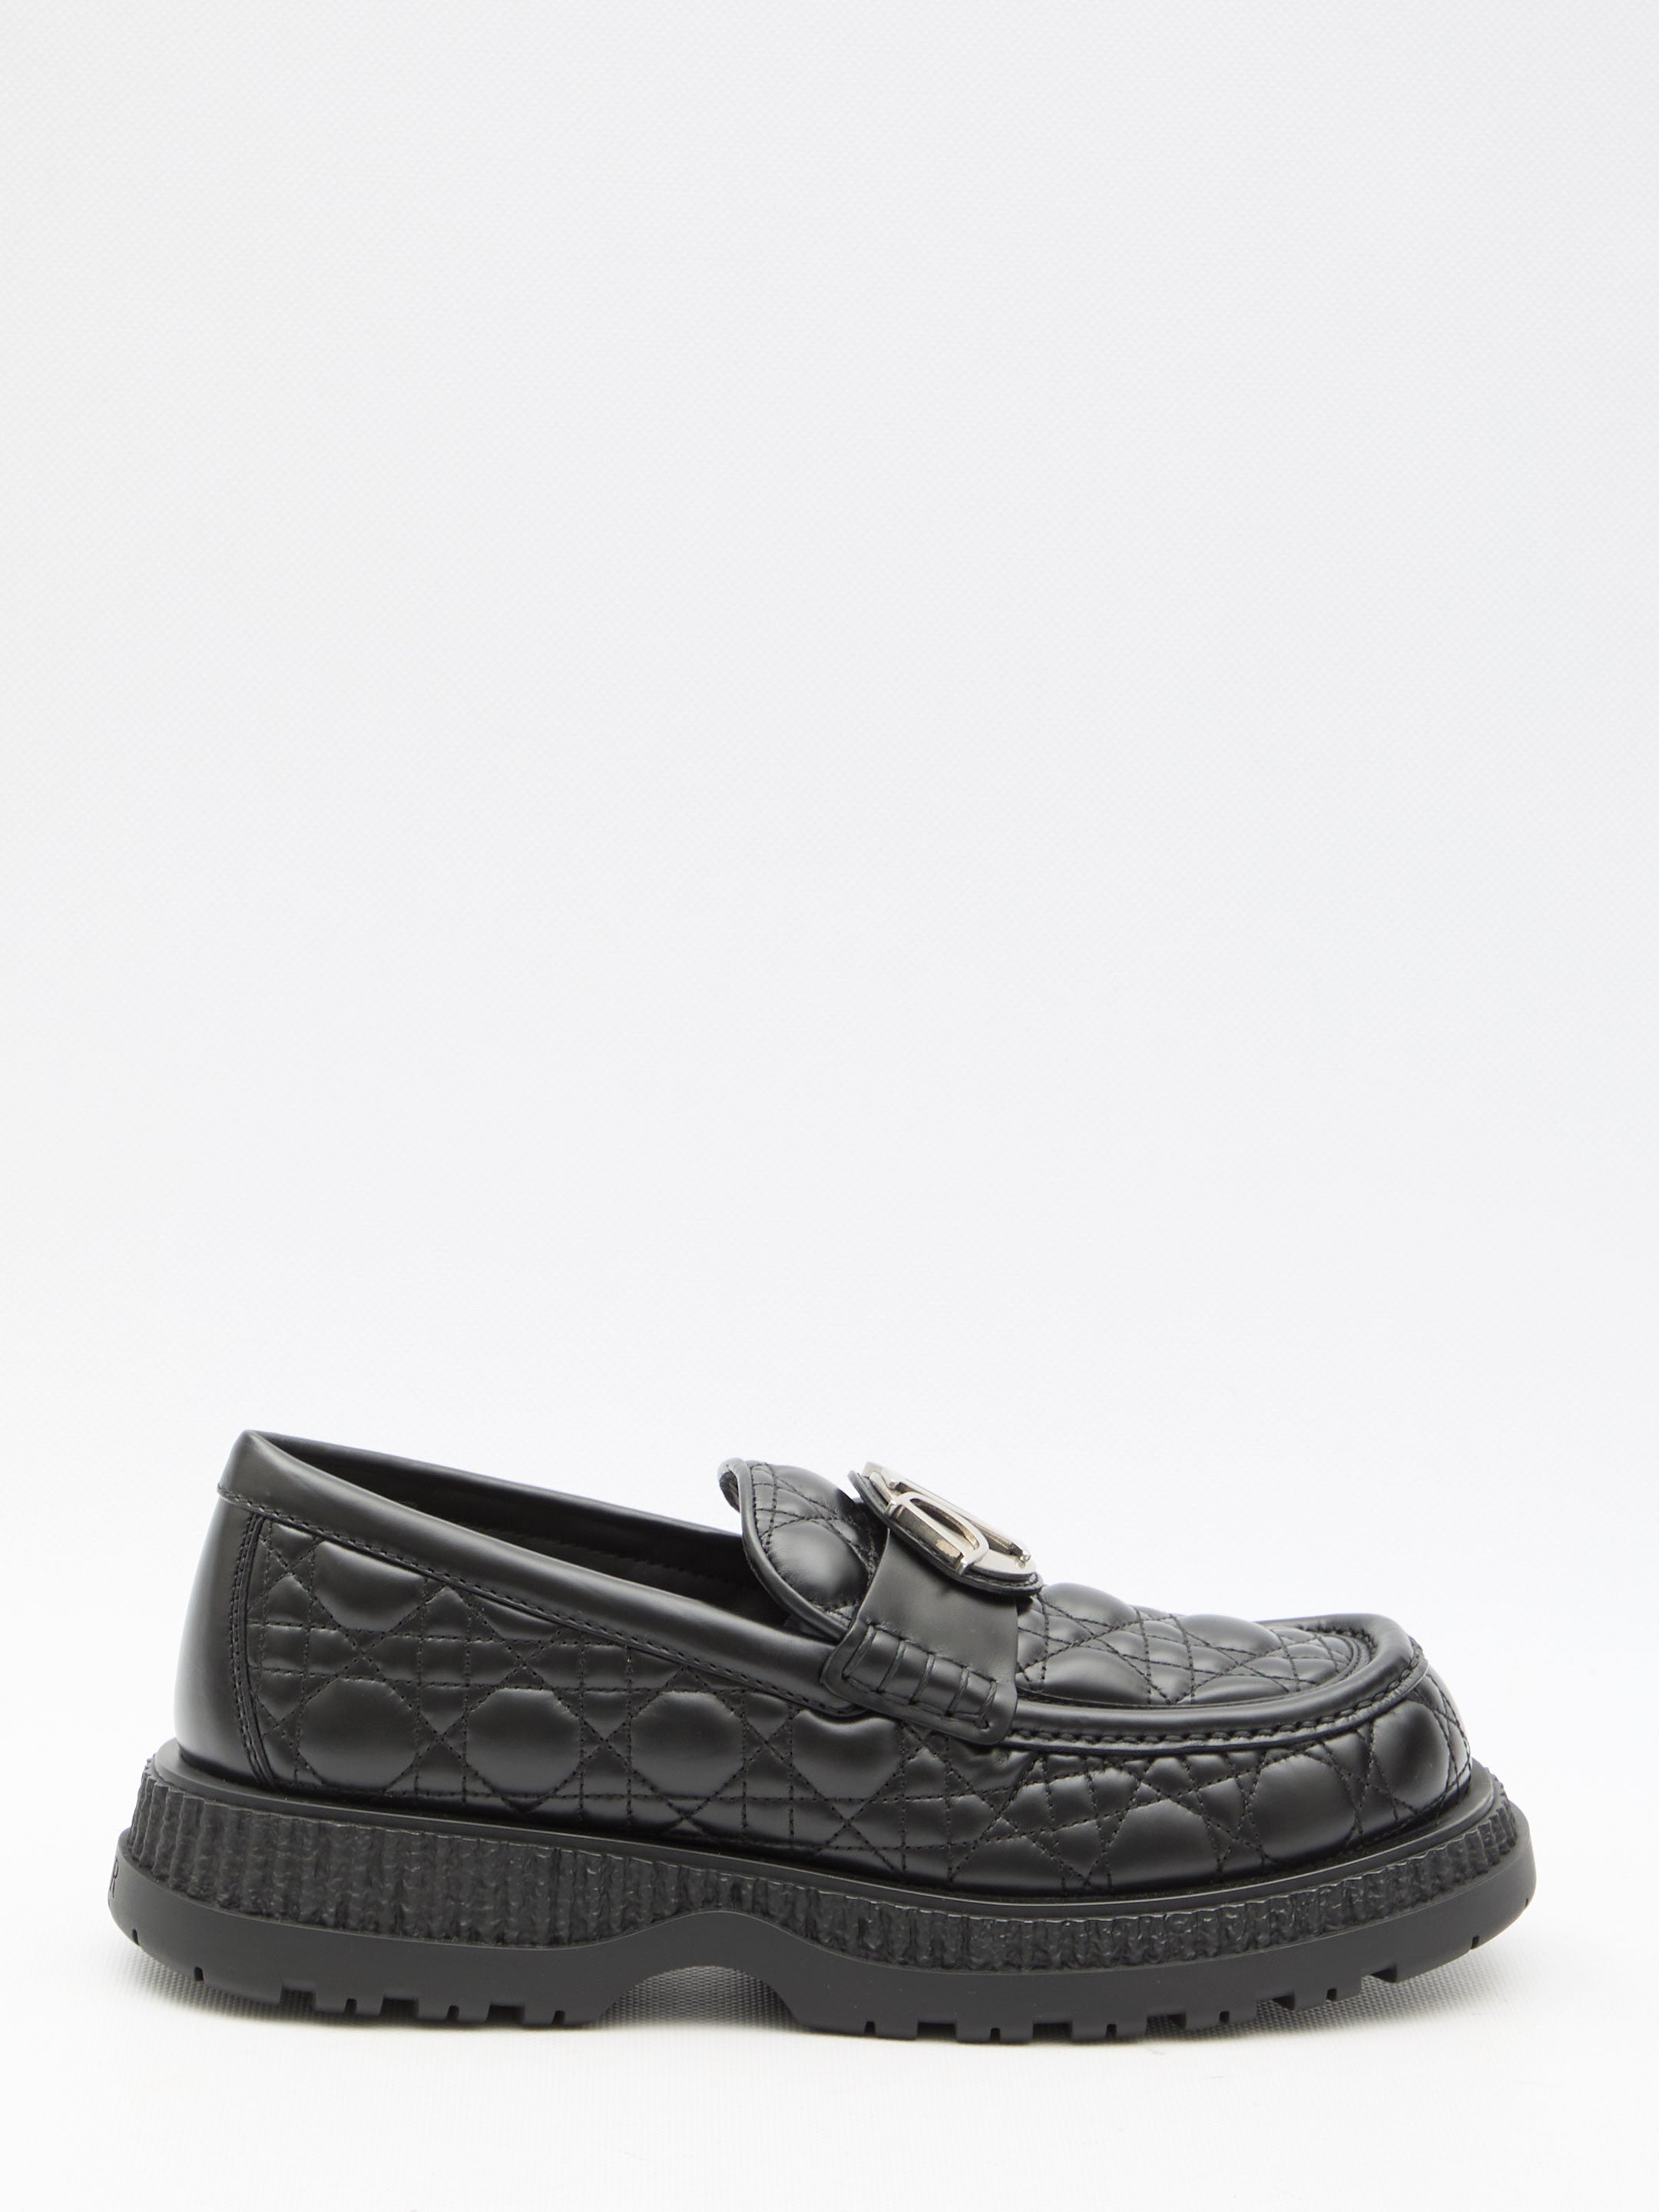 DIOR-HOMME-OUTLET-SALE-Dior-Buffalo-loafers-Flache-Schuhe-41-BLACK-ARCHIVE-COLLECTION.jpg